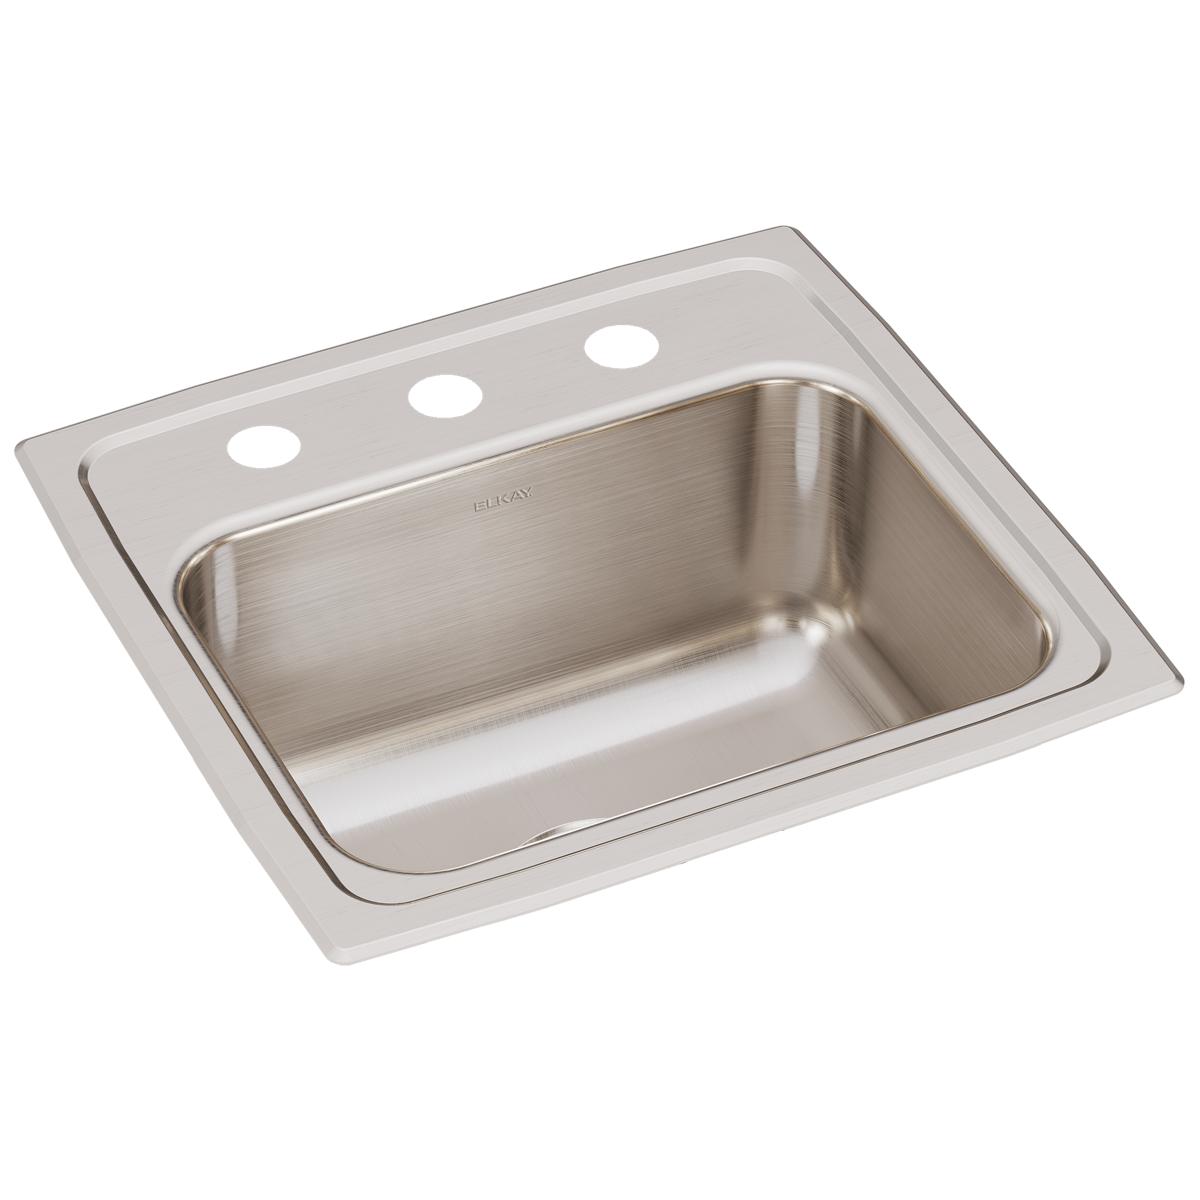 Elkay Lustertone Classic 17" x 16" x 7-5/8" Single Bowl Drop-in Sink with Quick-clip